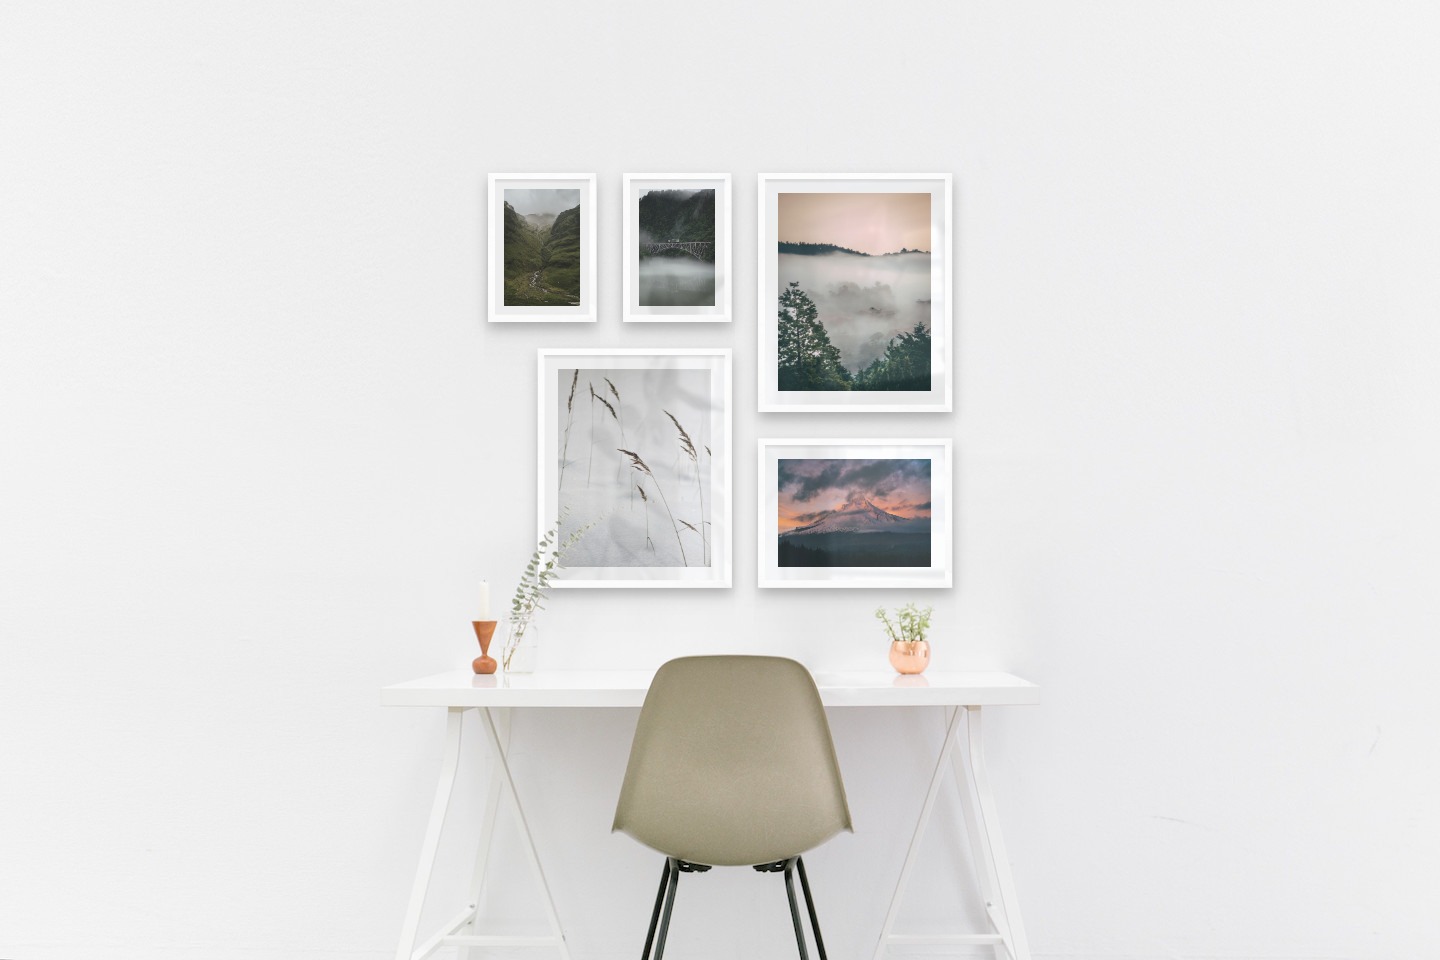 Gallery wall with picture frames in white in sizes 21x30, 40x50 and 30x40 with prints "Train over bridge", "Stream in valley", "Sharp in the snow", "Wooden tops and orange sky" and "Sunset and mountains"